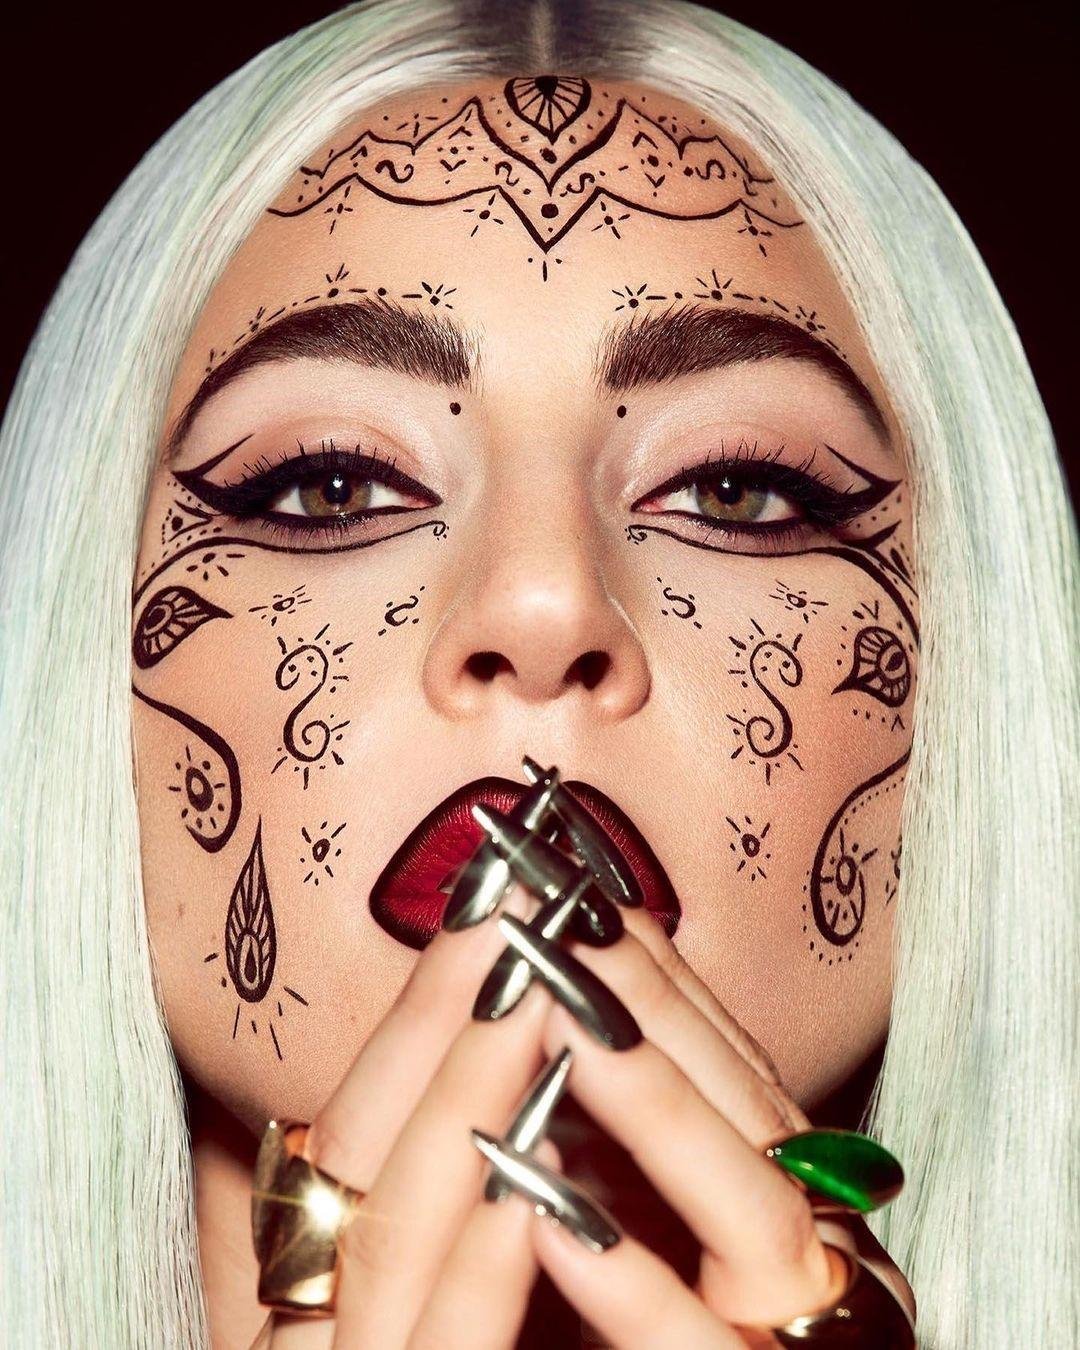 Lady Gagas ethnic makeup delighted fans